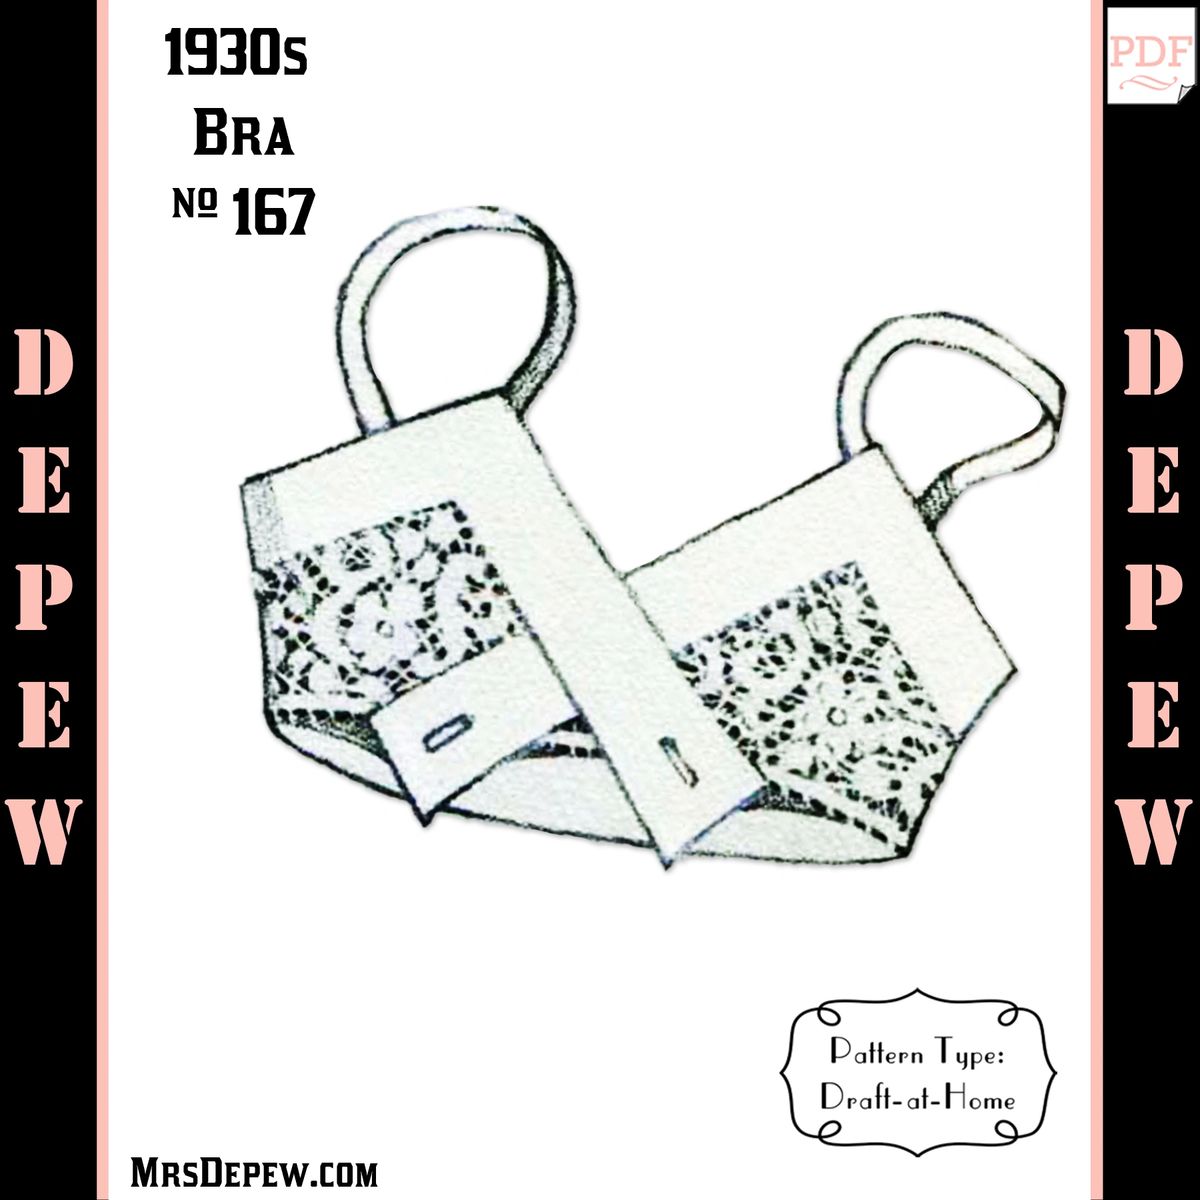 D-A-H Vintage Sewing Pattern 1960s Bra in Any Size - PLUS Size Included  -528B